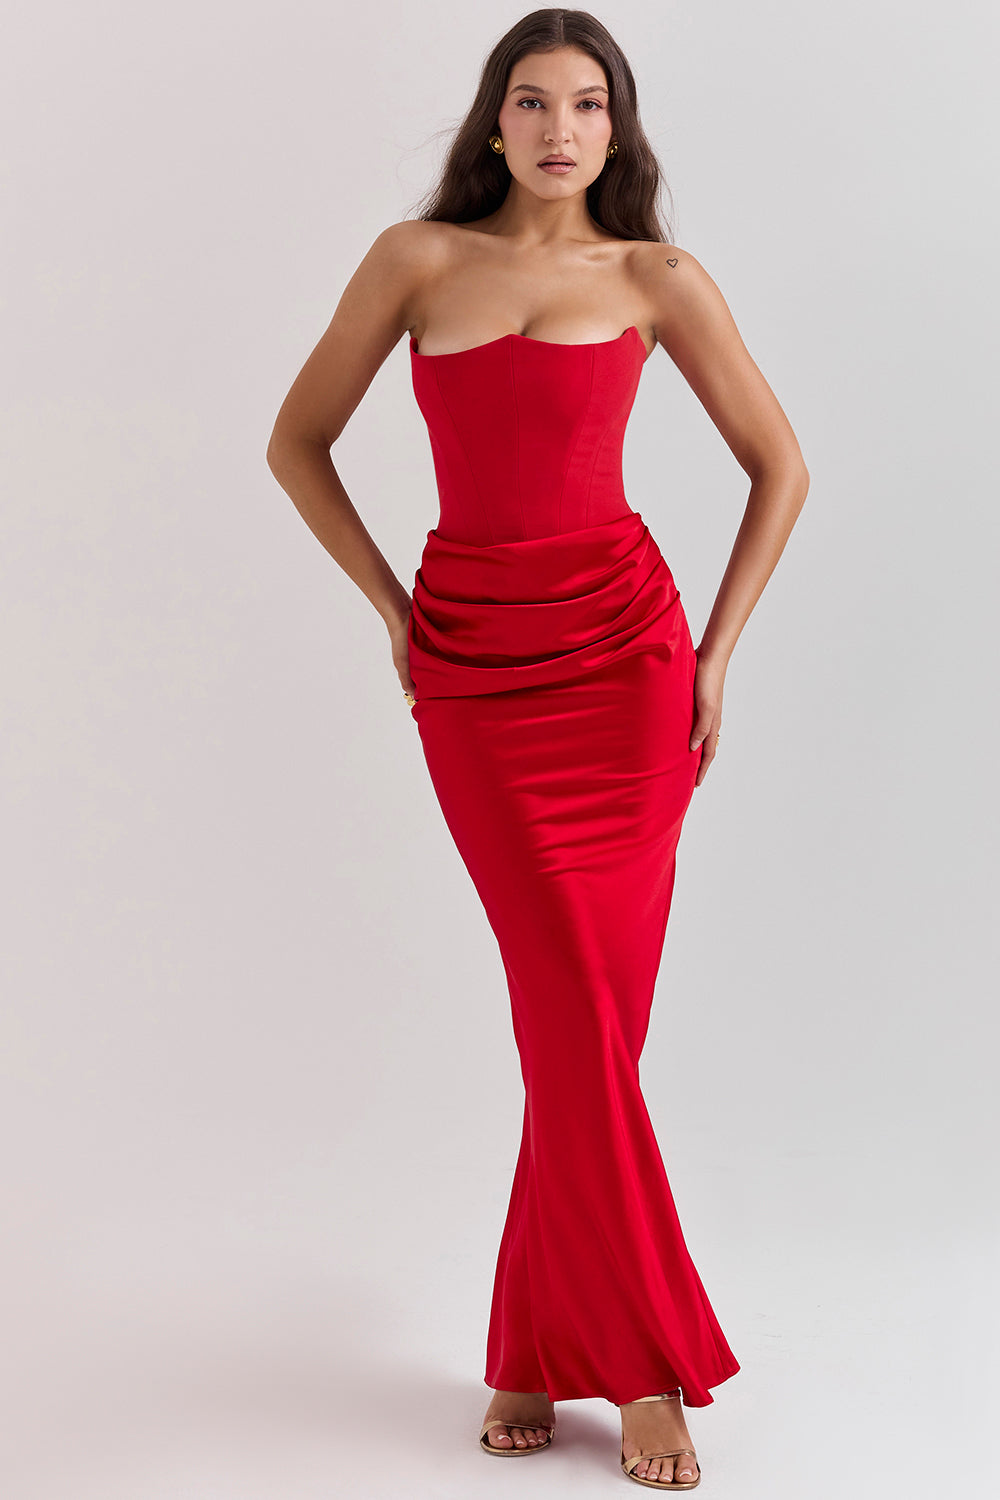 HOUSE OF CB PERSEPHONE CORSET MAXI DRESS SCARLET RED